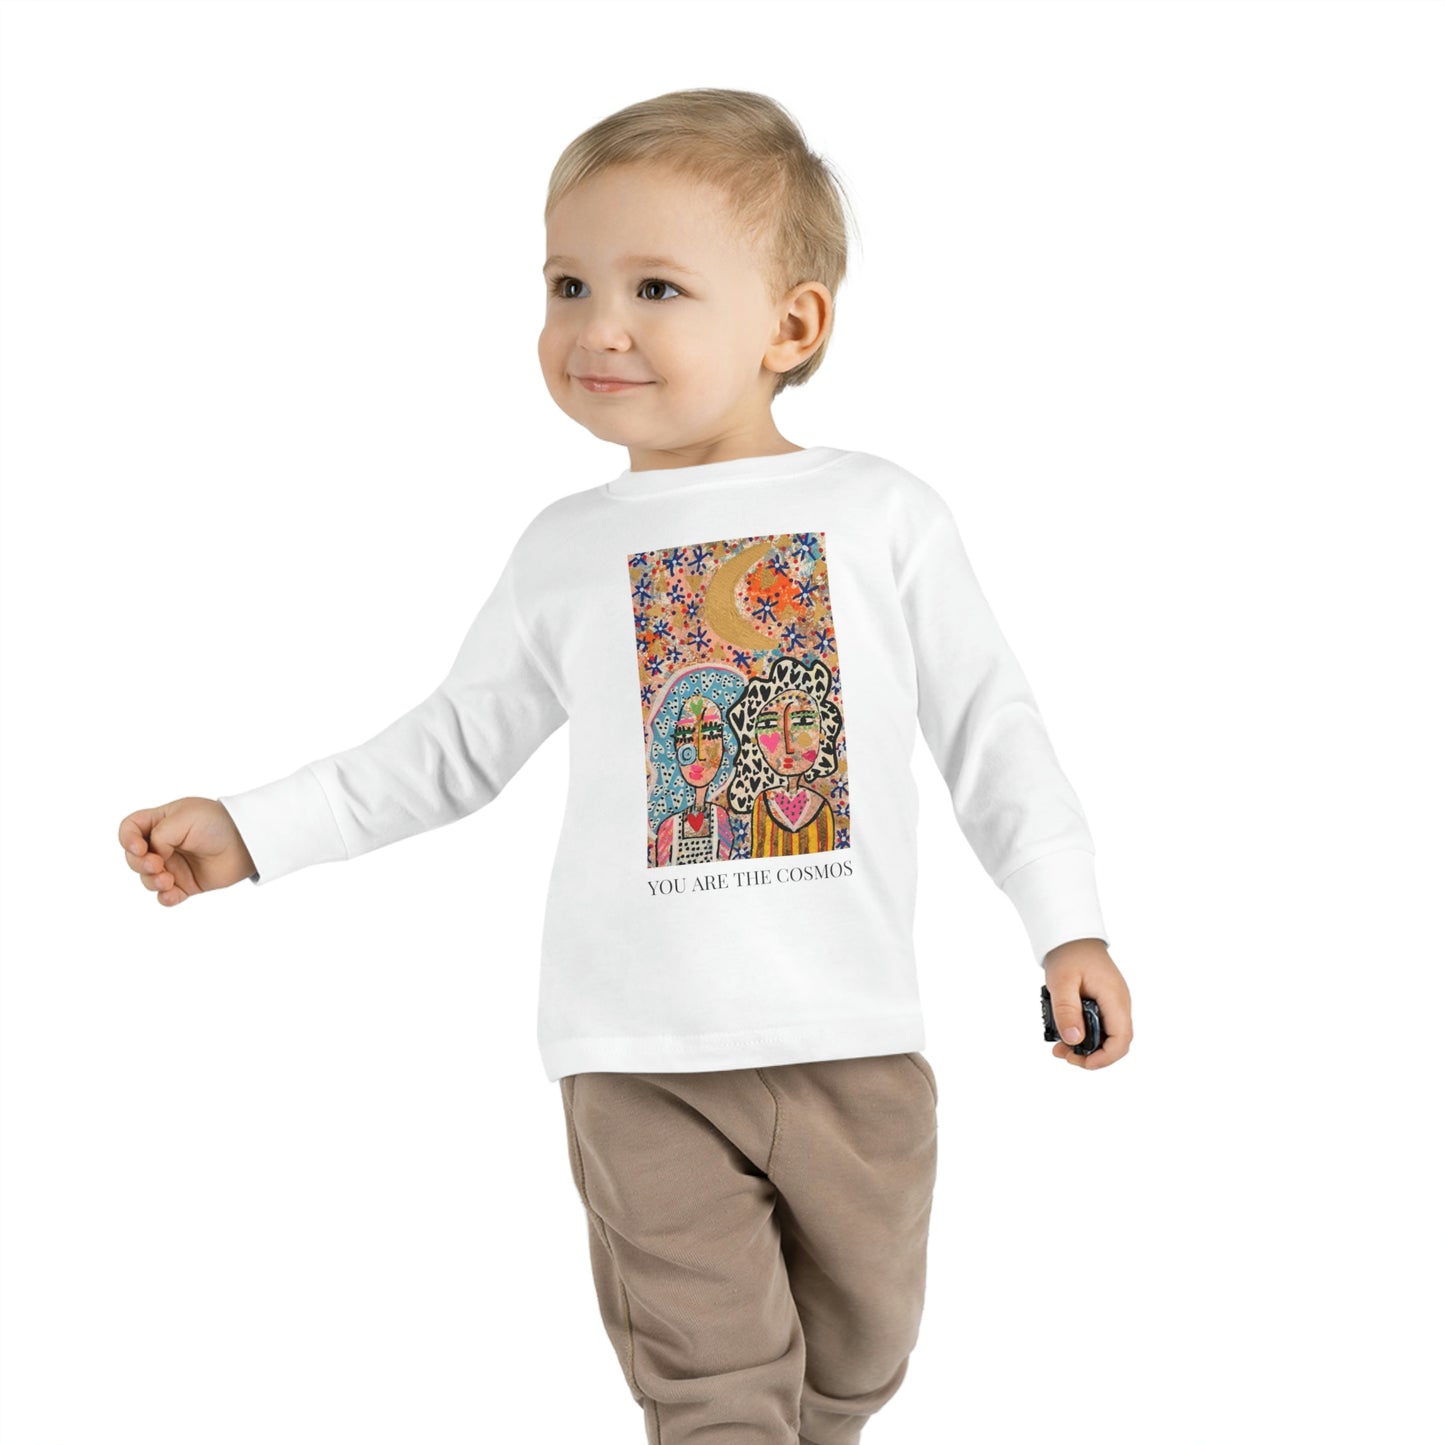 "YOU ARE THE COSMOS" GIRL TALK ART Toddler Long Sleeve Tee